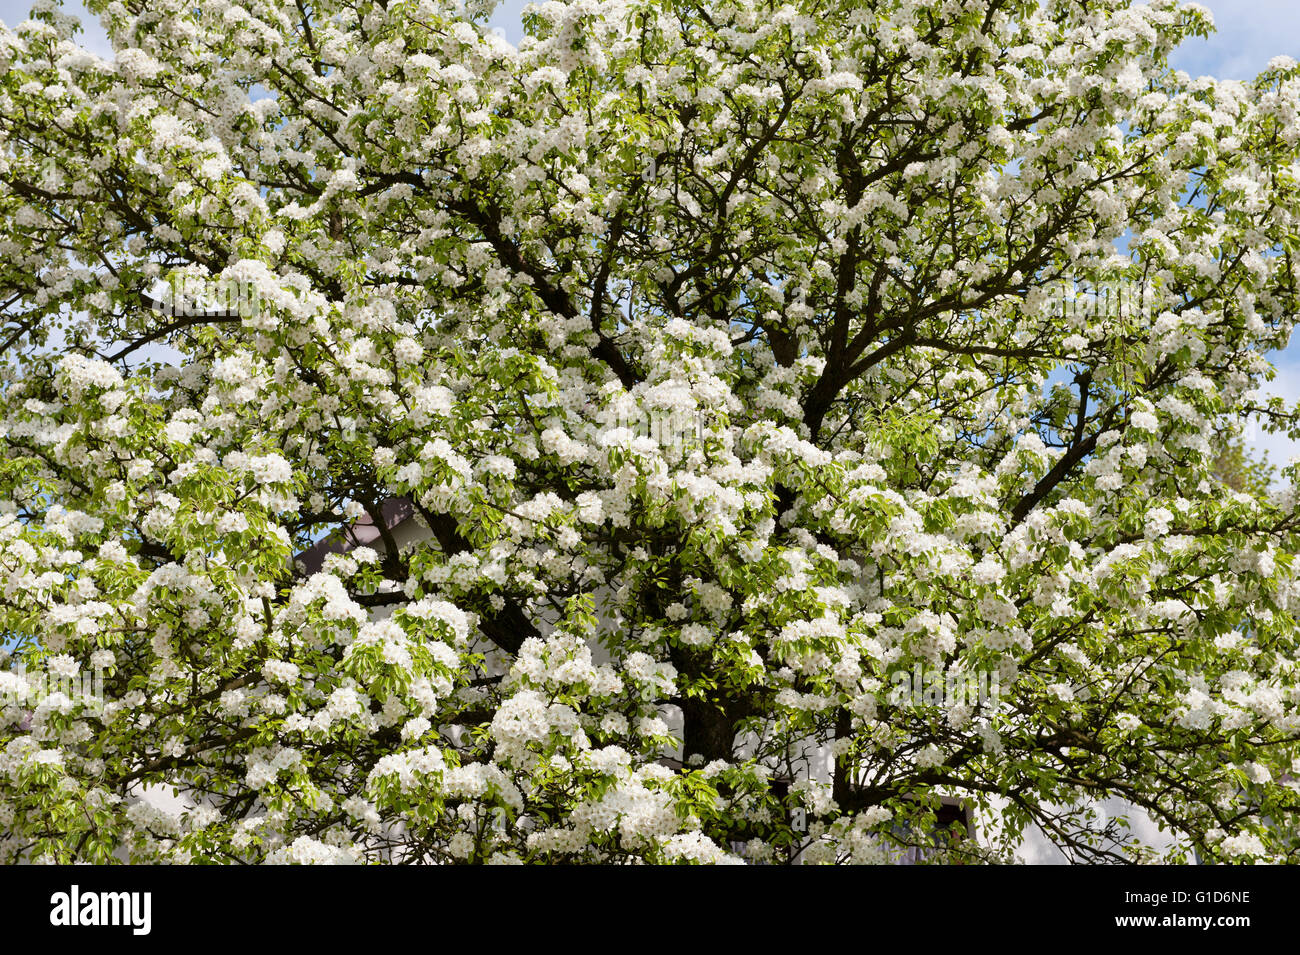 White blooming apple tree, Malus flowering in spring season in Poland, Europe, plenty flowers and buds, lush blossoms. Stock Photo